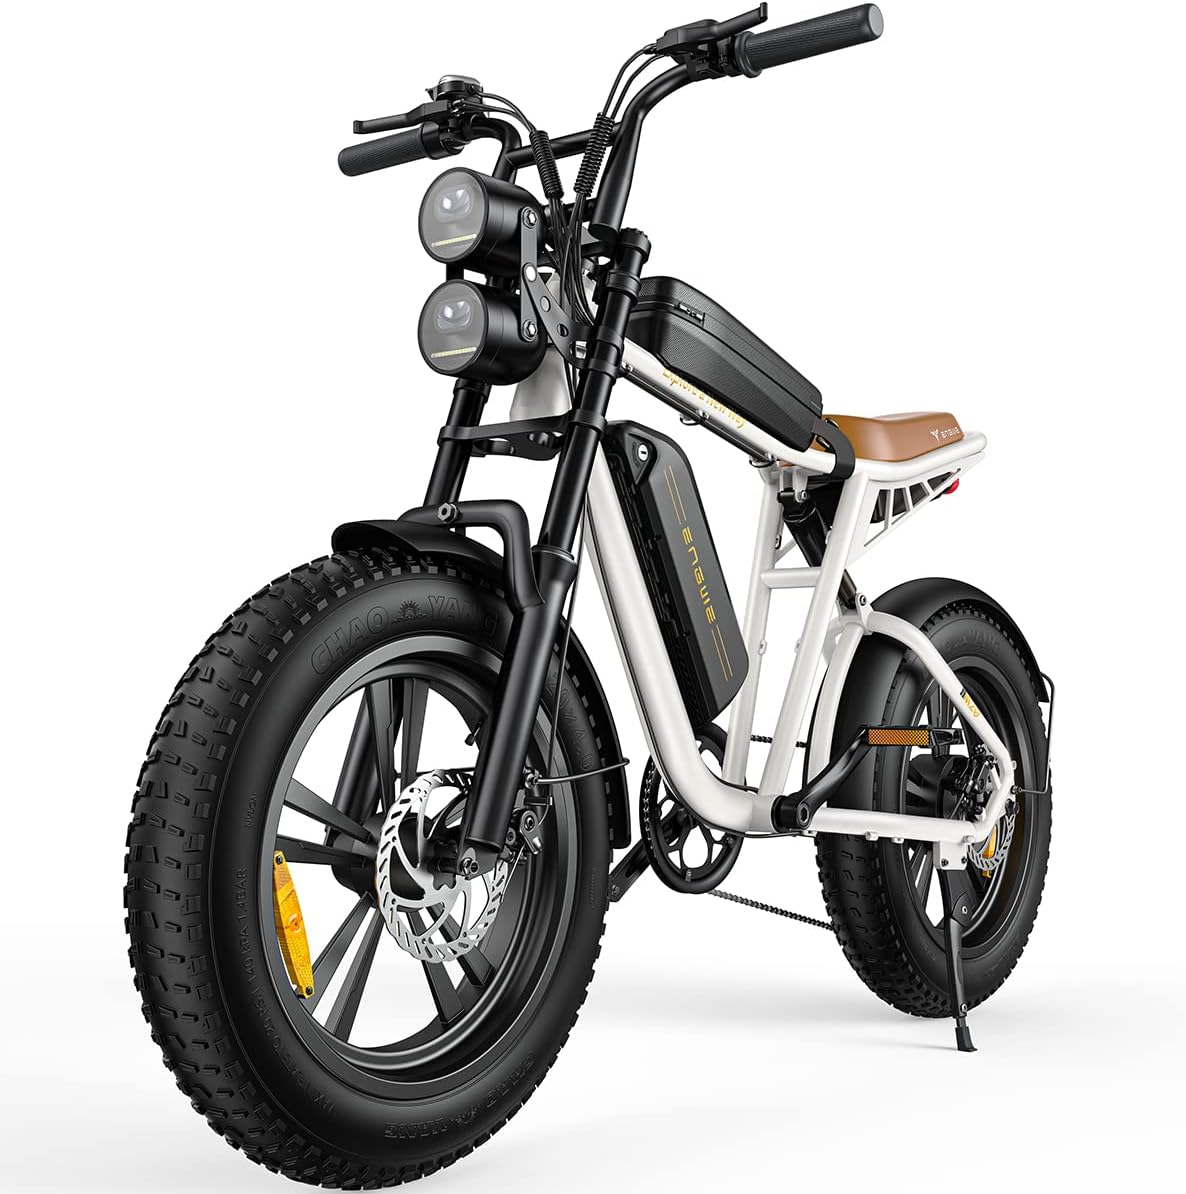 ENGWE M20 Ebikes for Adults - 750W Motor 4.0 * 20" Fat Tire Offroad Cruiser E Motorcycle 28MPH 94Miles Long Range for 48V13A Dual Battery Option,Full Suspension UL Certified, White